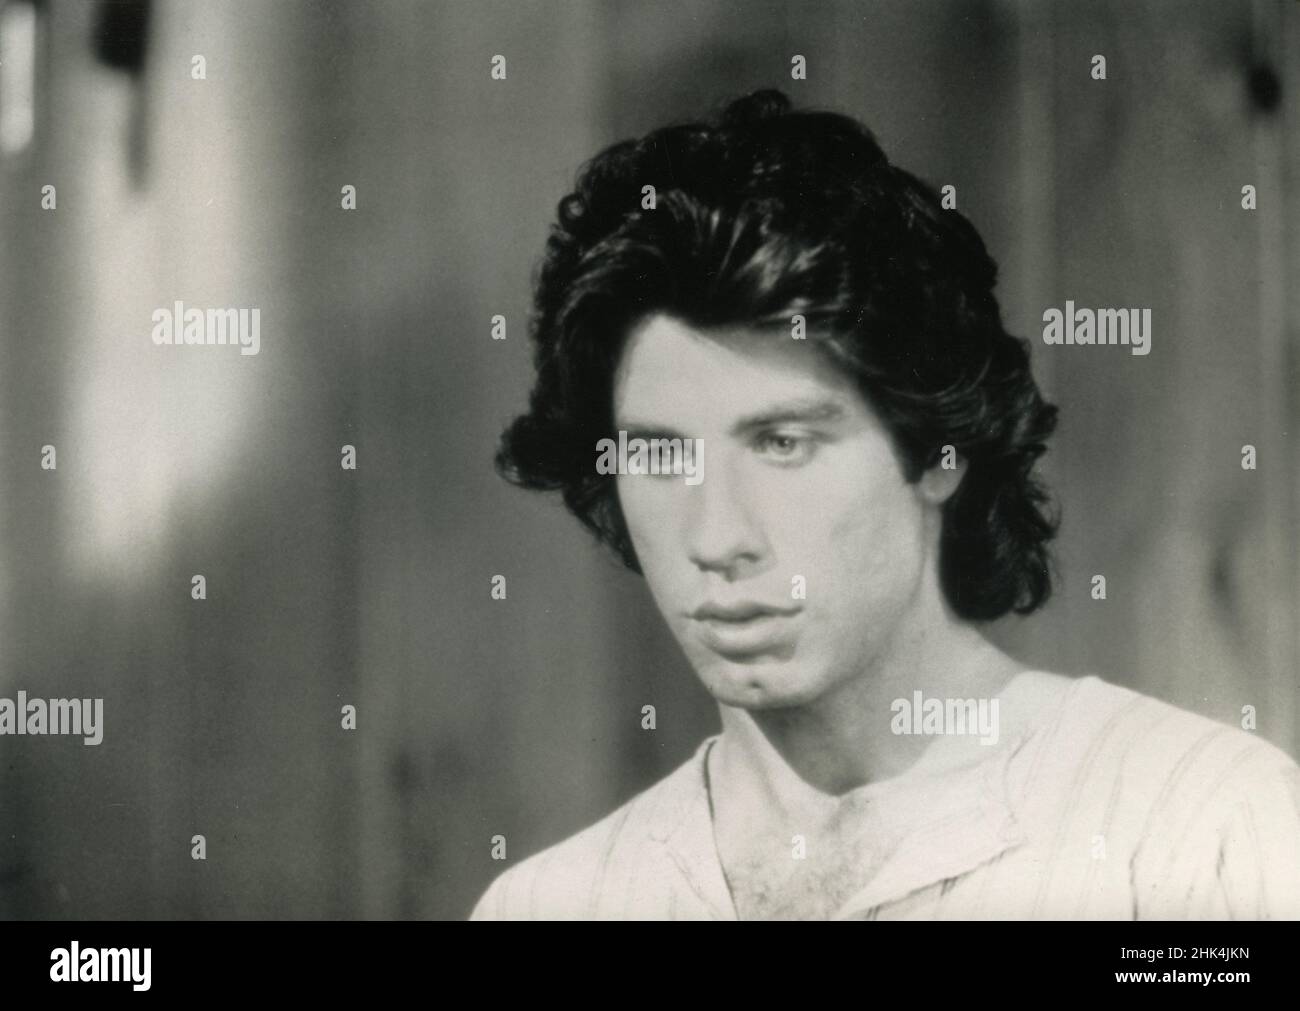 American actor John Travolta in the movie Moment by Moment, USA 1978 Stock Photo